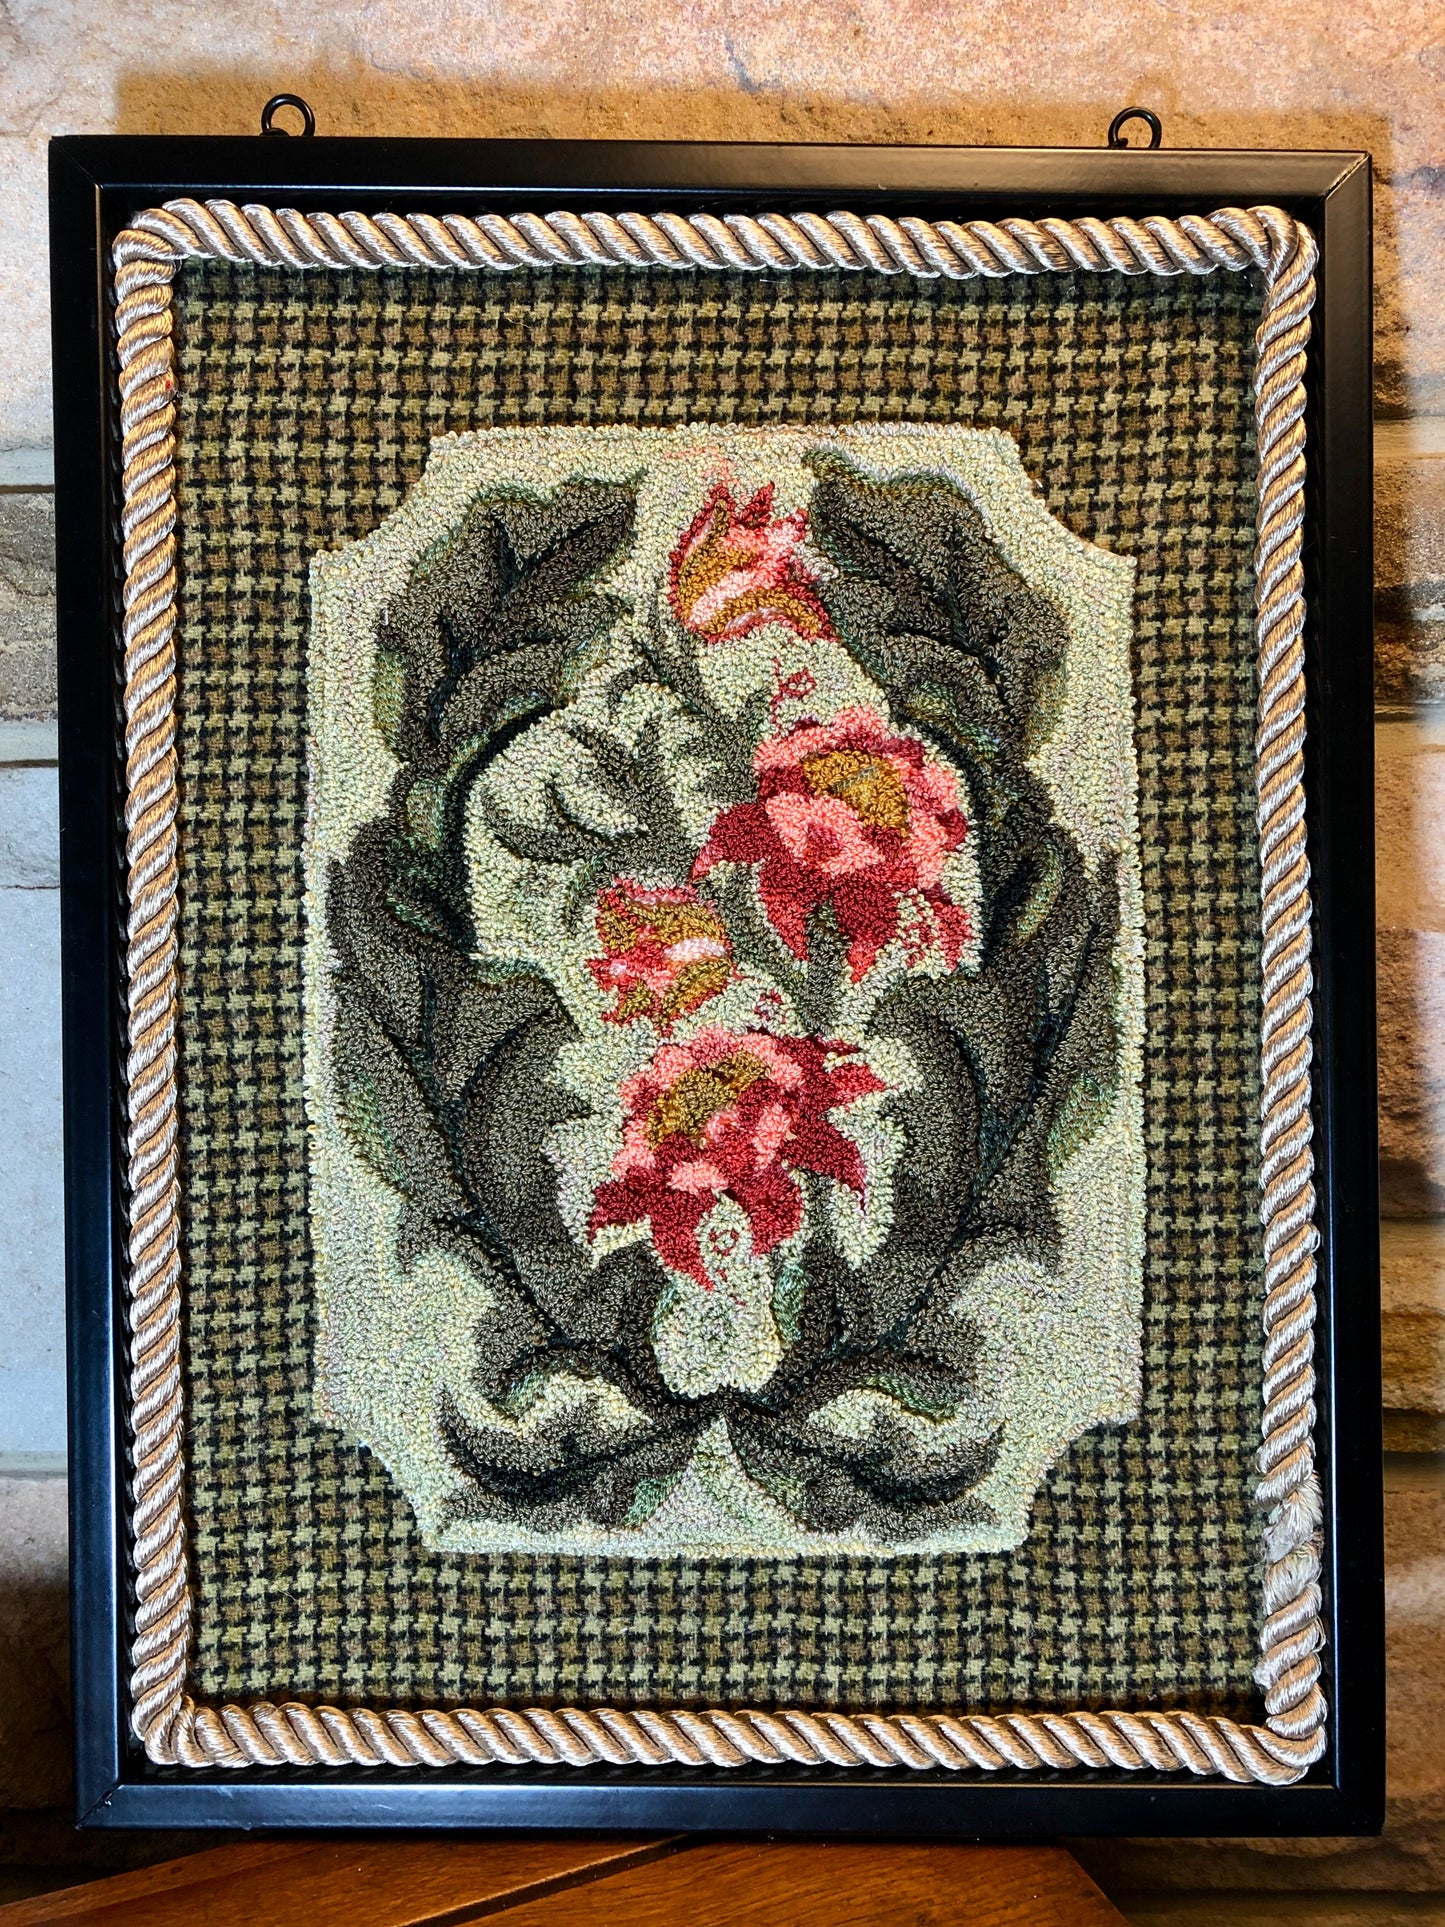 On The Vine- Punch Needle Pattern By Orphaned Wool. Patterns are available as a paper pattern or a pattern on weavers cloth fabric. Both Types of patterns included the Valdani and DMC Floss color codes. This is a wonderful floral design punch needle pattern.